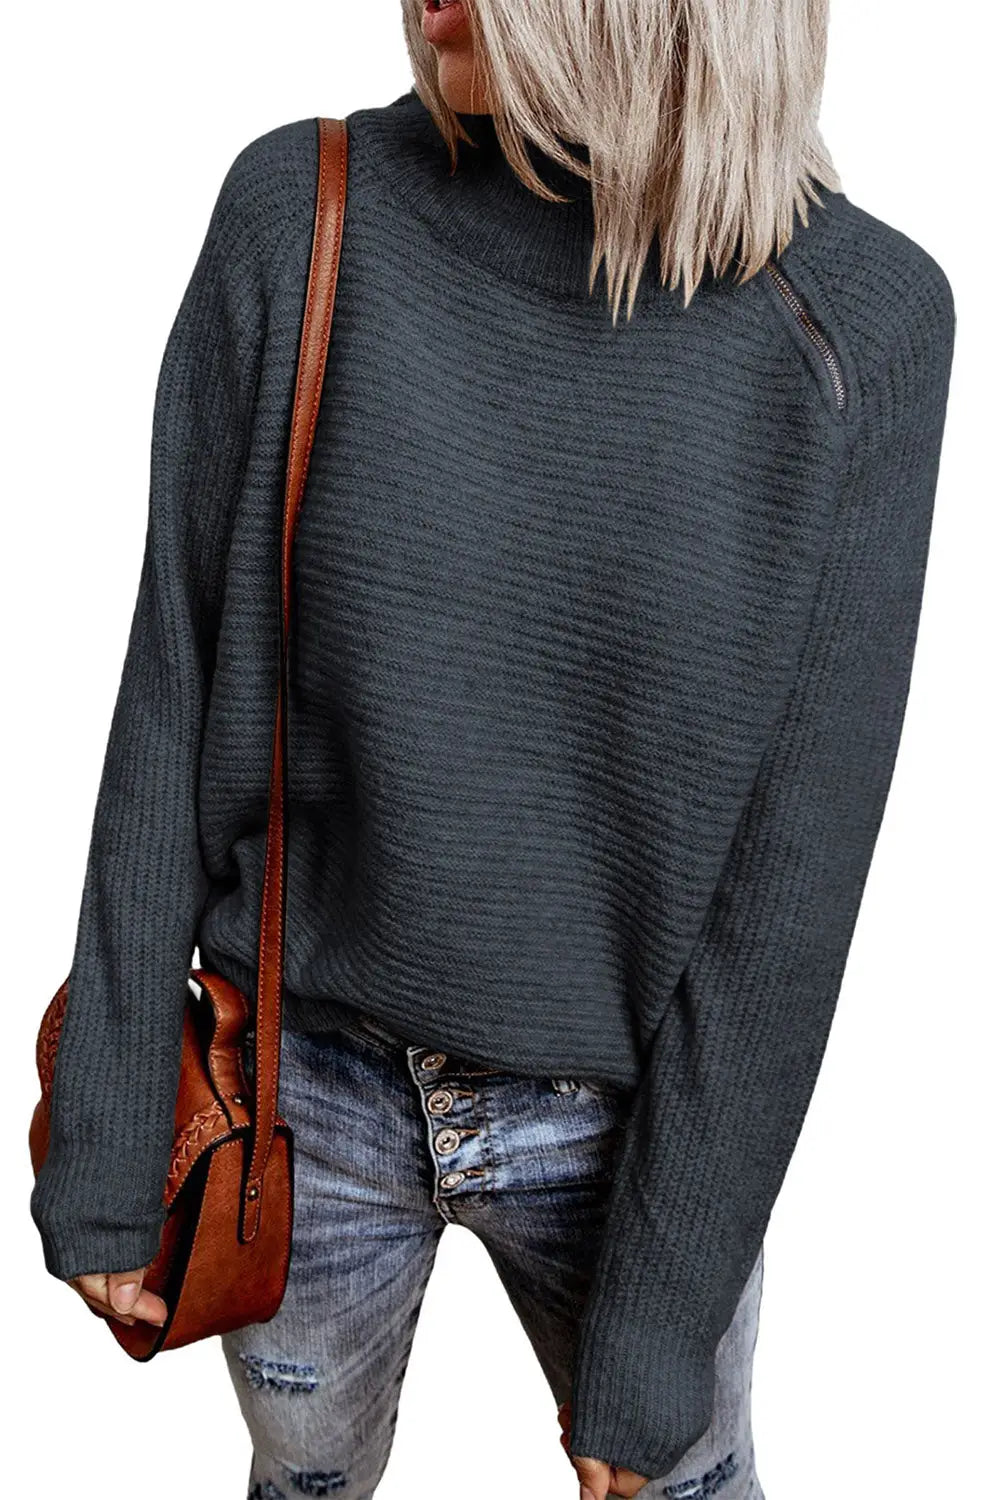 Gray zip knitted high neck sweater - sweaters & cardigans